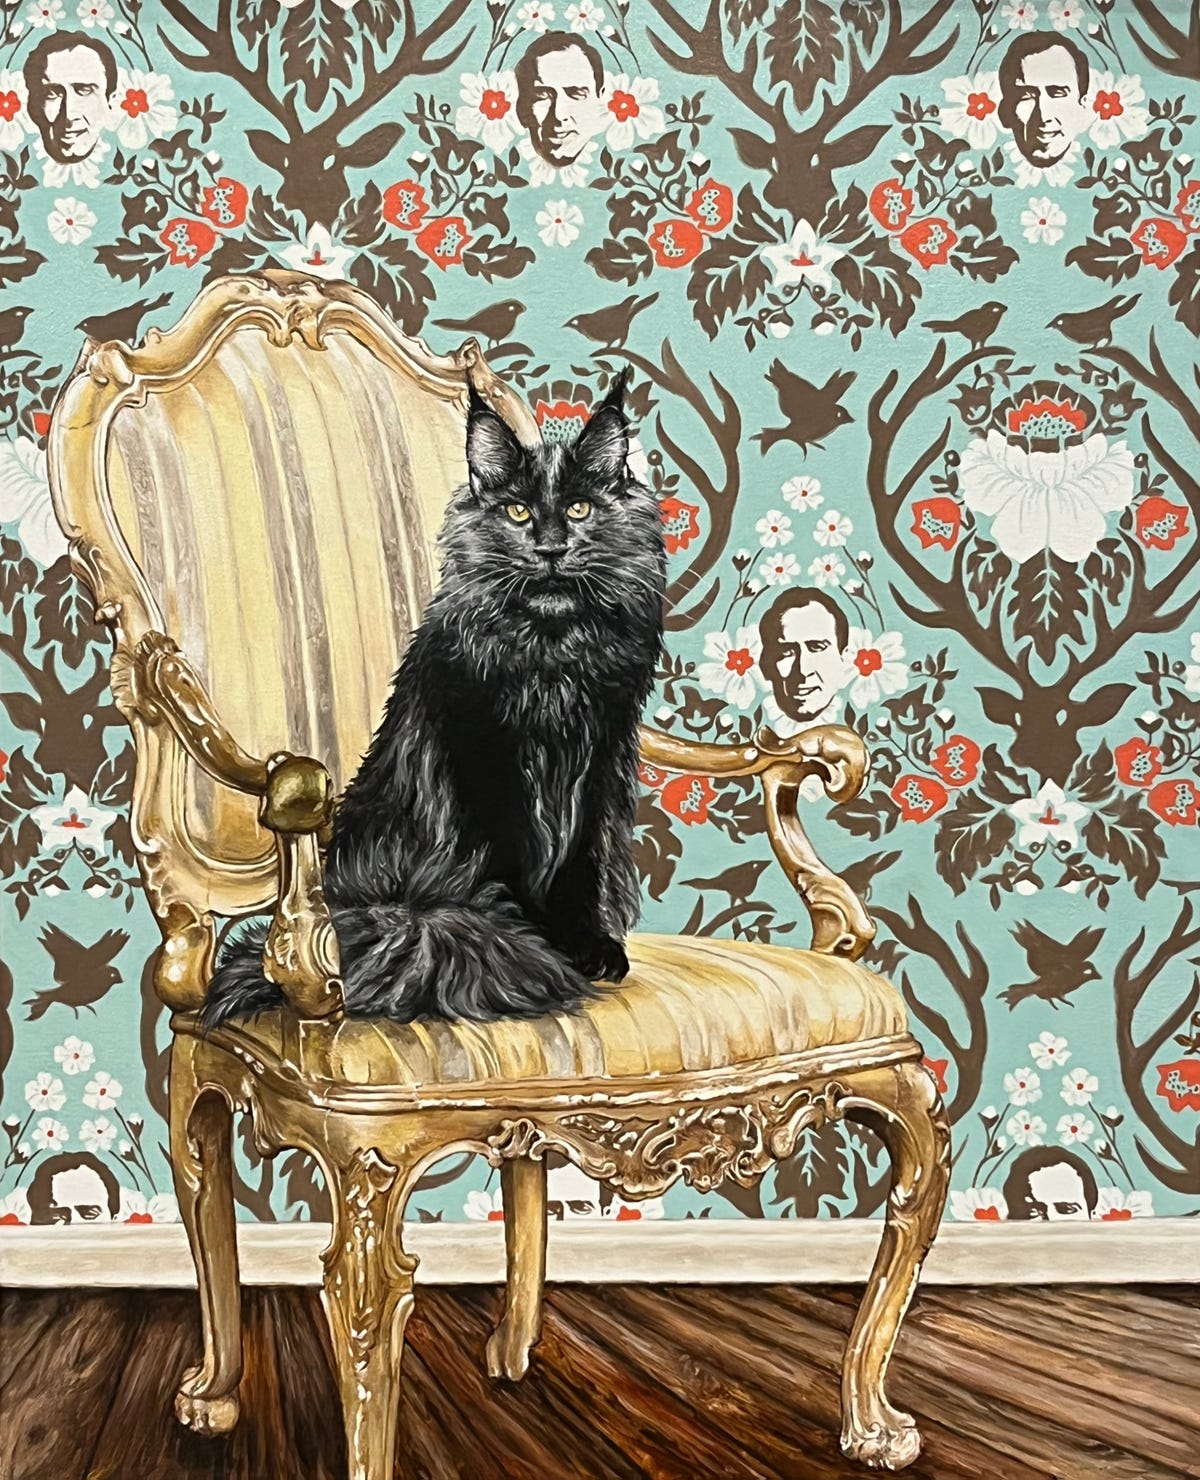 Merlin, oil on canvas by Michael Caines, shows Nic Cage cat sitting on a chair in front of wallpaper with Cage's face on it